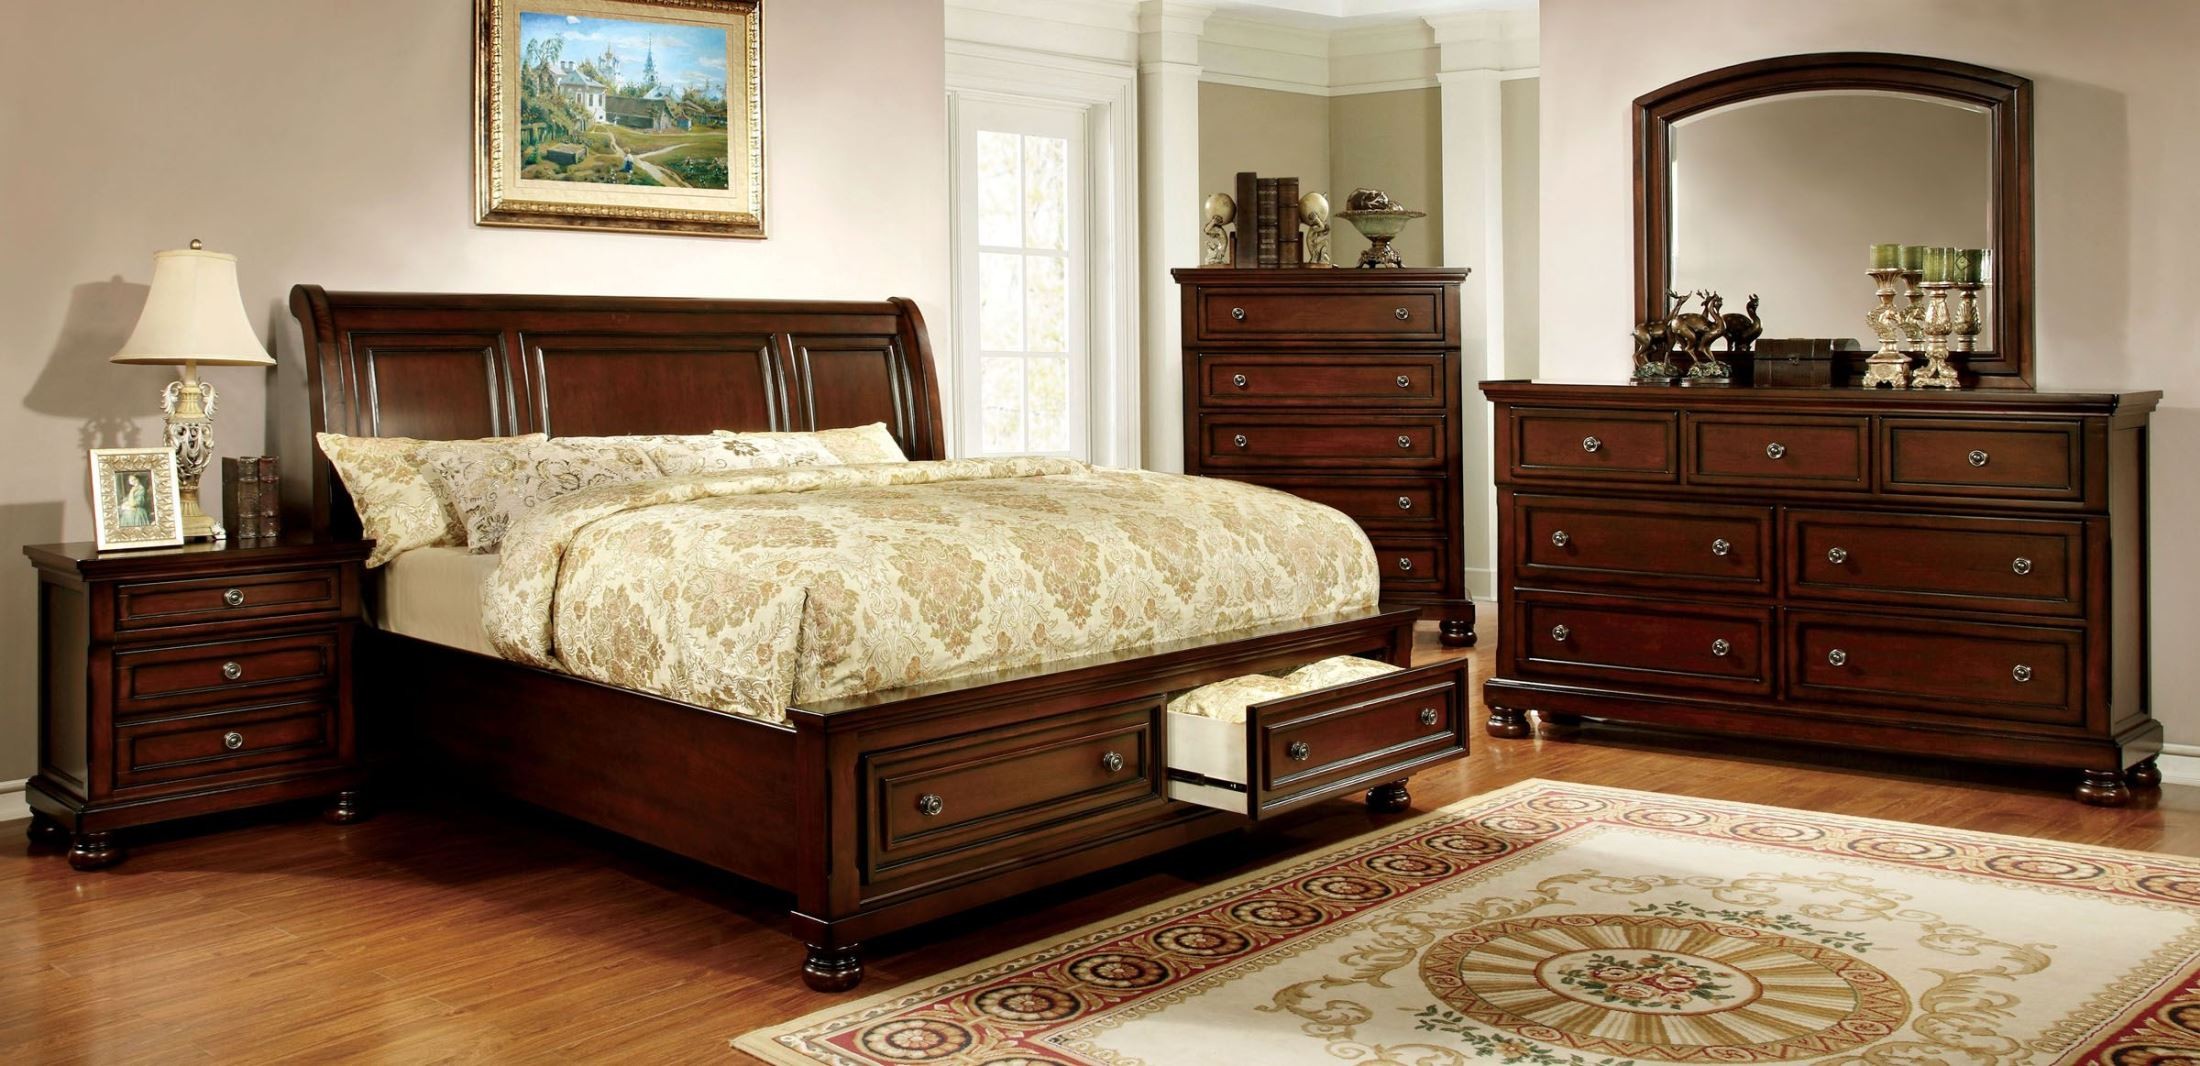 solid cherry bedroom furniture tennessee